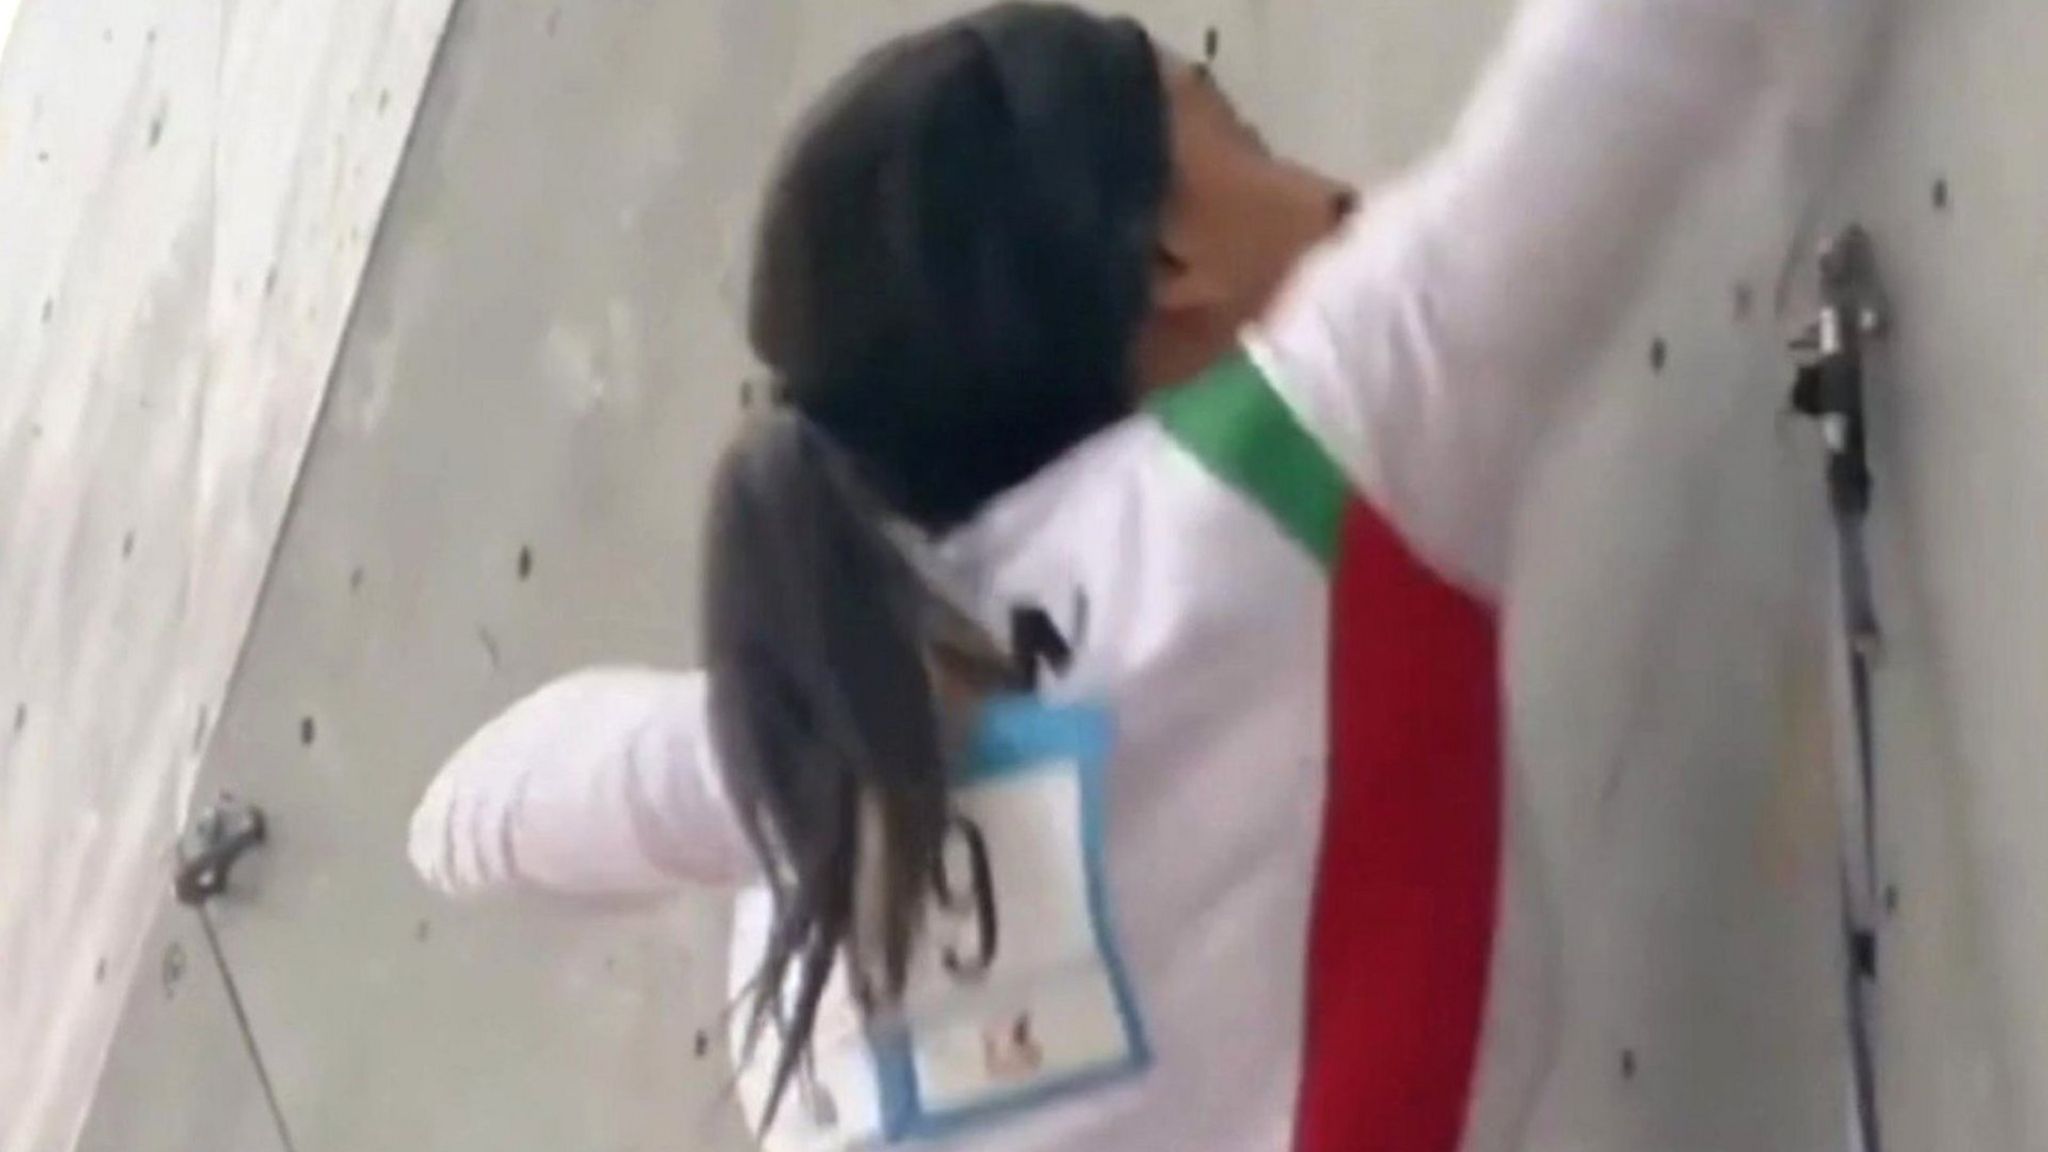 Iranian climber Elnaz Rekabi competes without a headscarf at the IFSC Asian Championships in Seoul, South Korea, on 16 October 2022